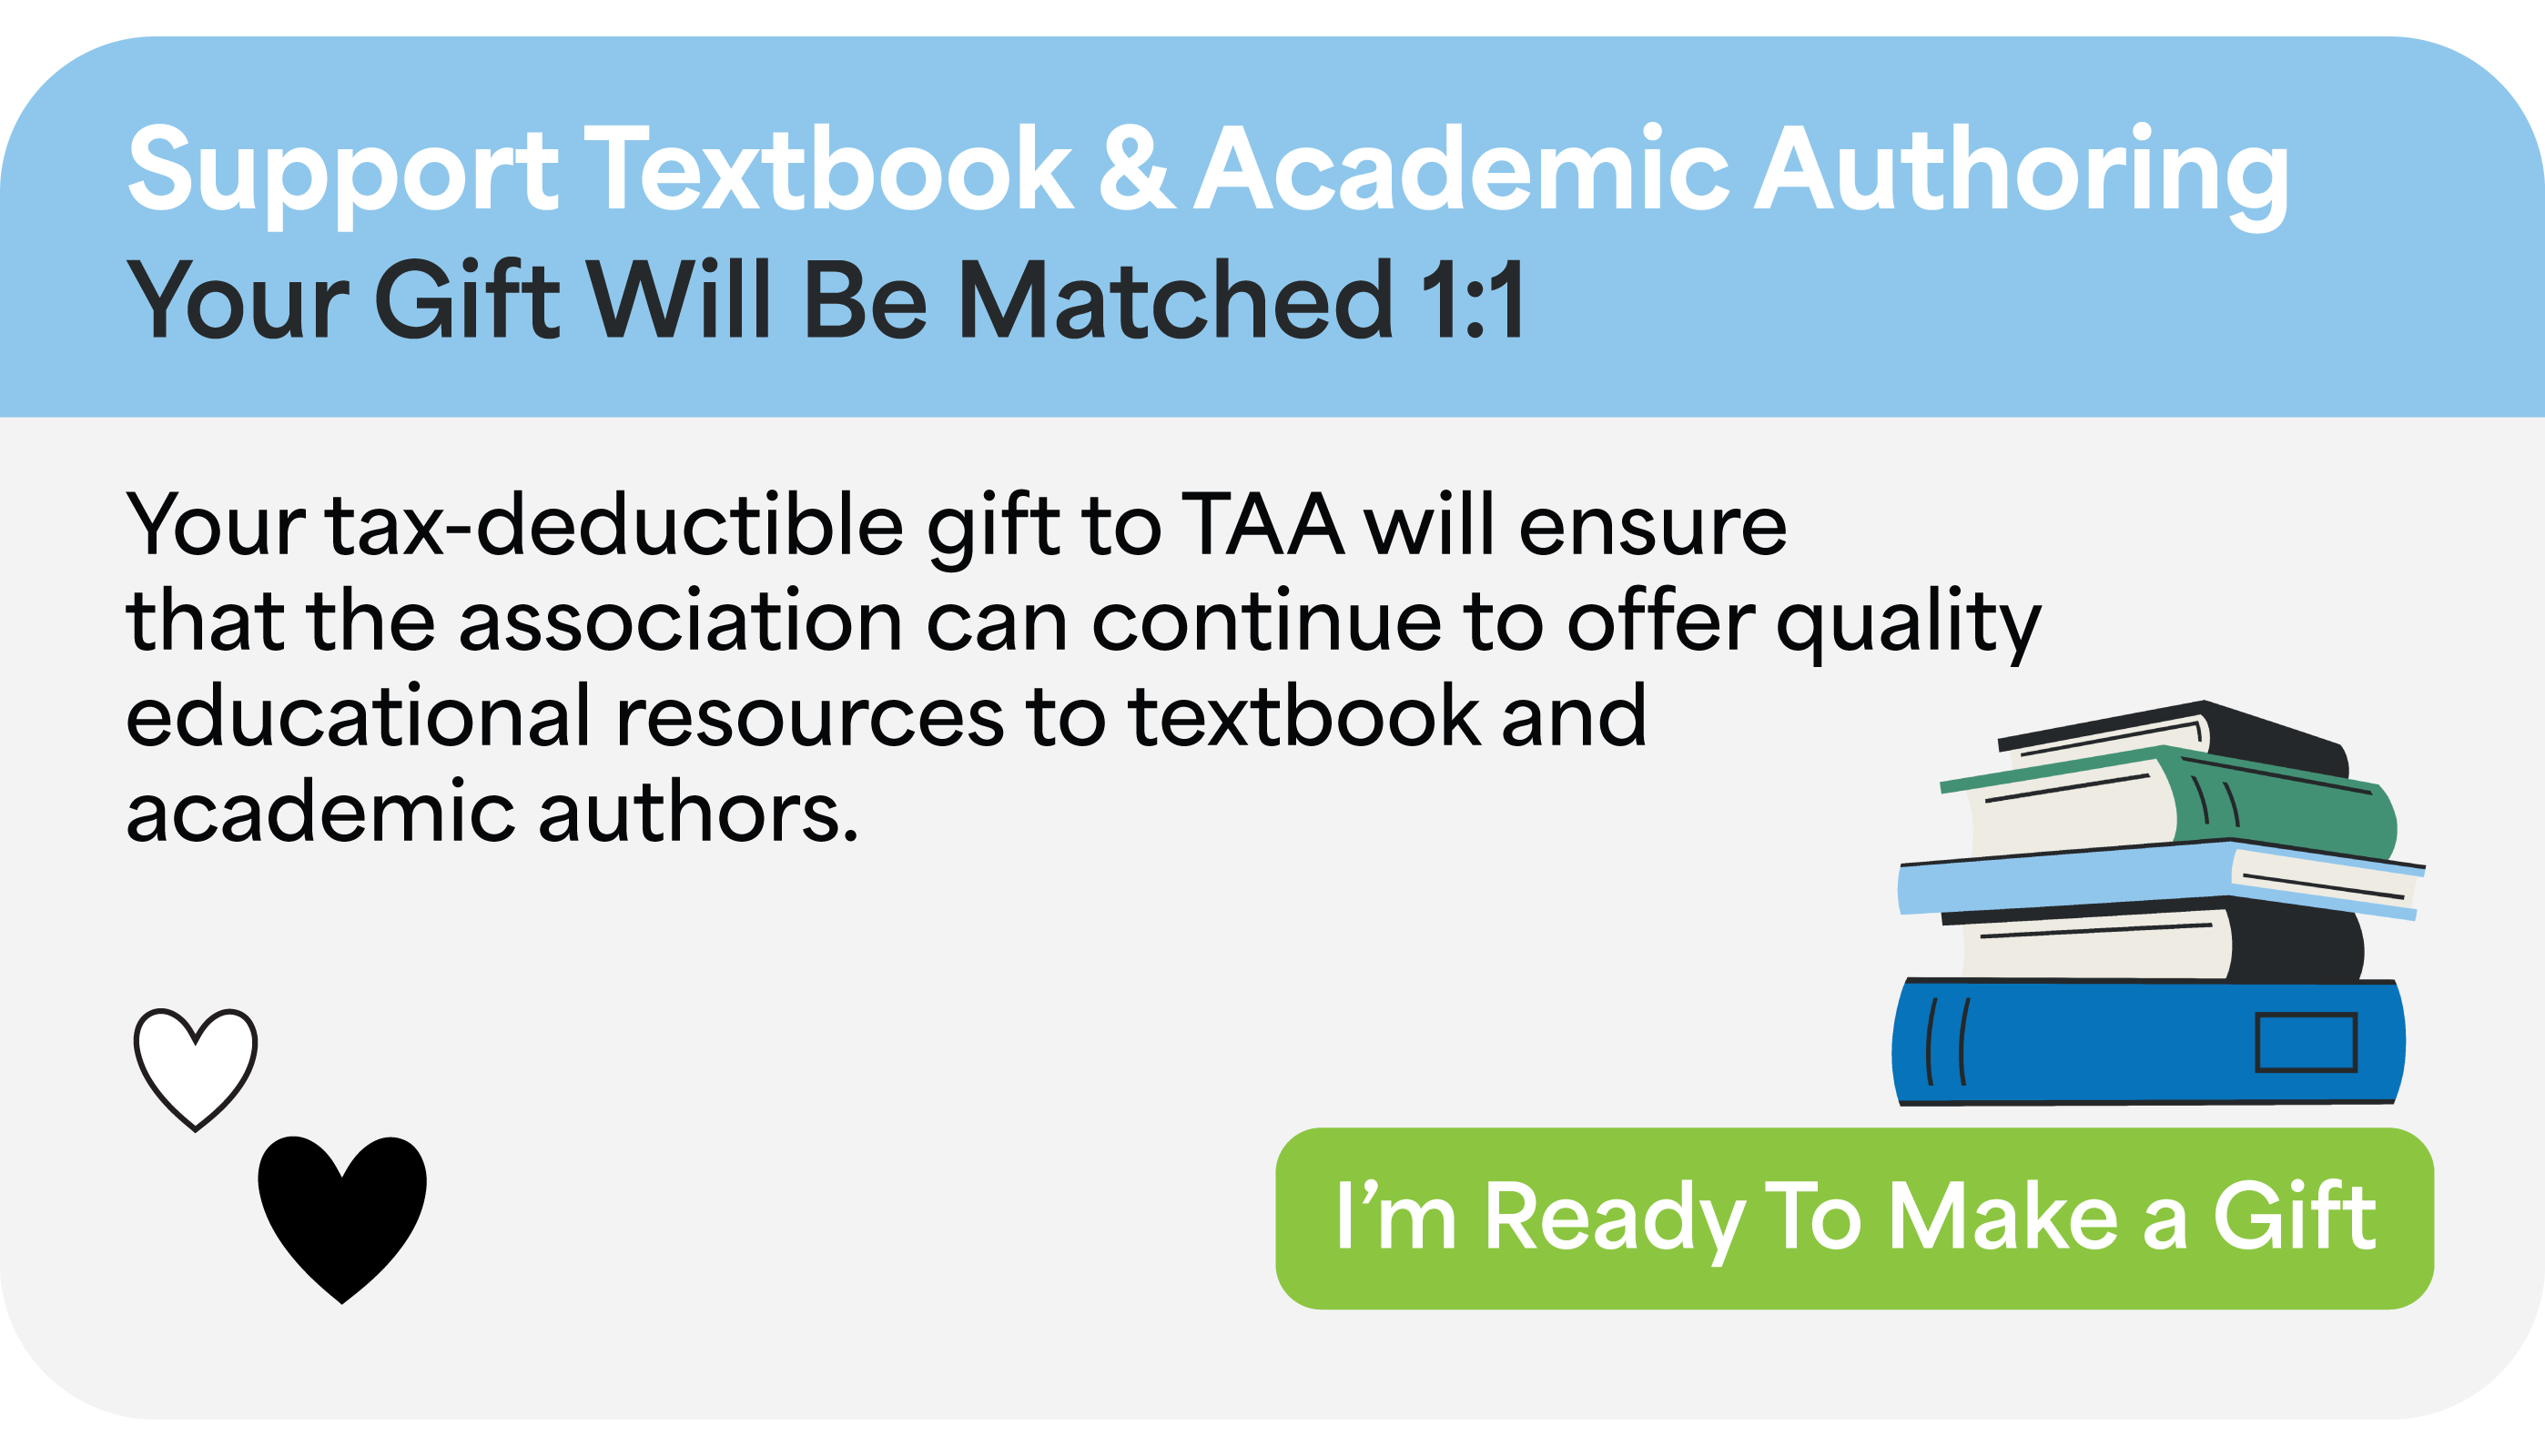 Thank you for supporting Textbook & Academic Authoring